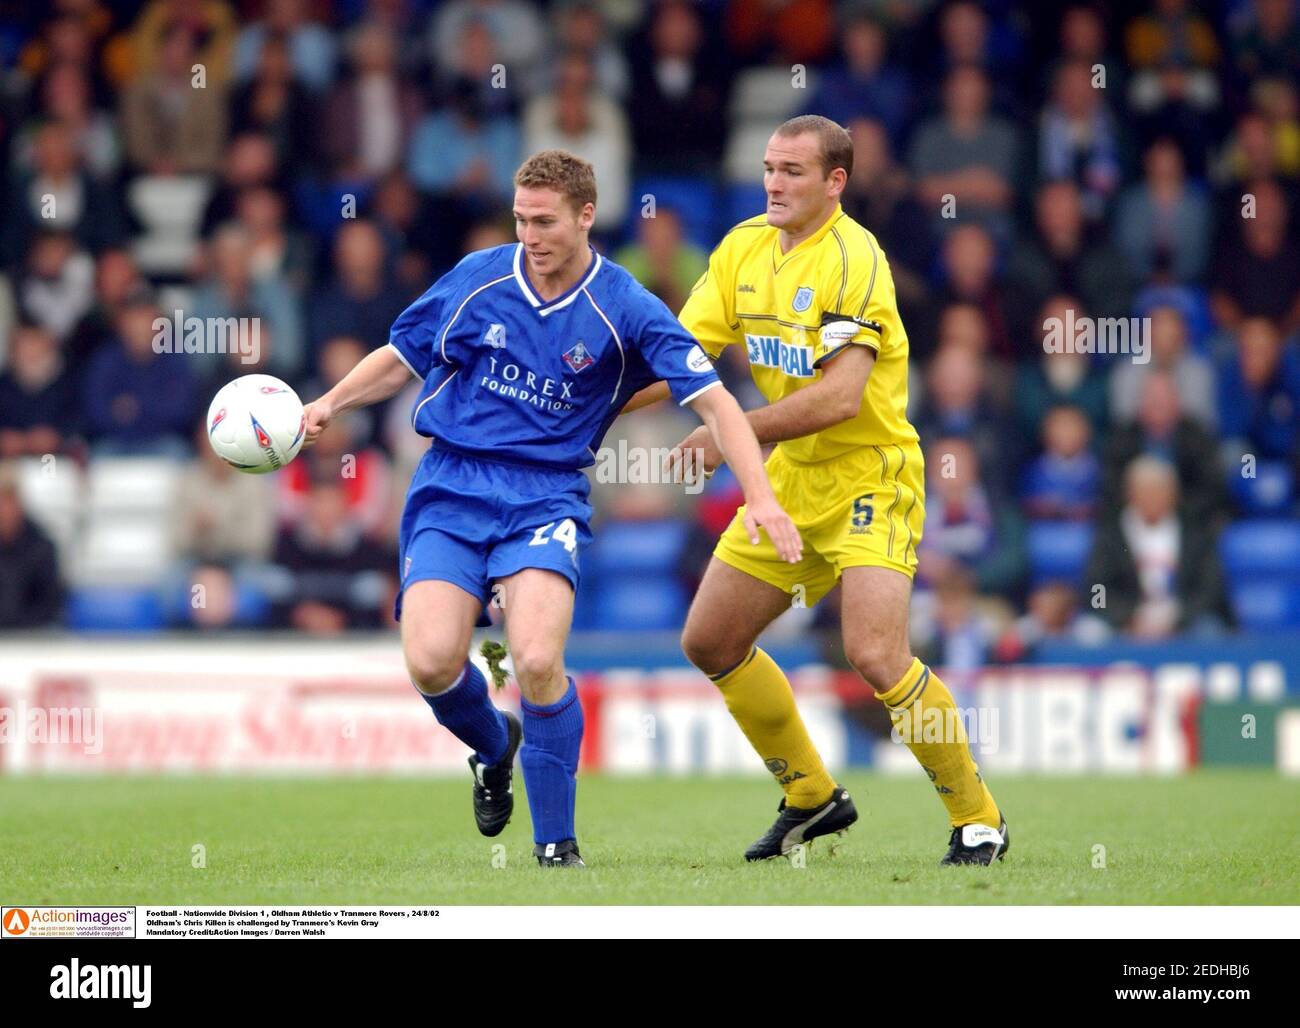 Football - Nationwide Division 1 , Oldham Athletic v Tranmere Rovers , 24/8/02  Oldham's Chris Killen is challenged by Tranmere's Kevin Gray  Mandatory Credit:Action Images / Darren Walsh Stock Photo